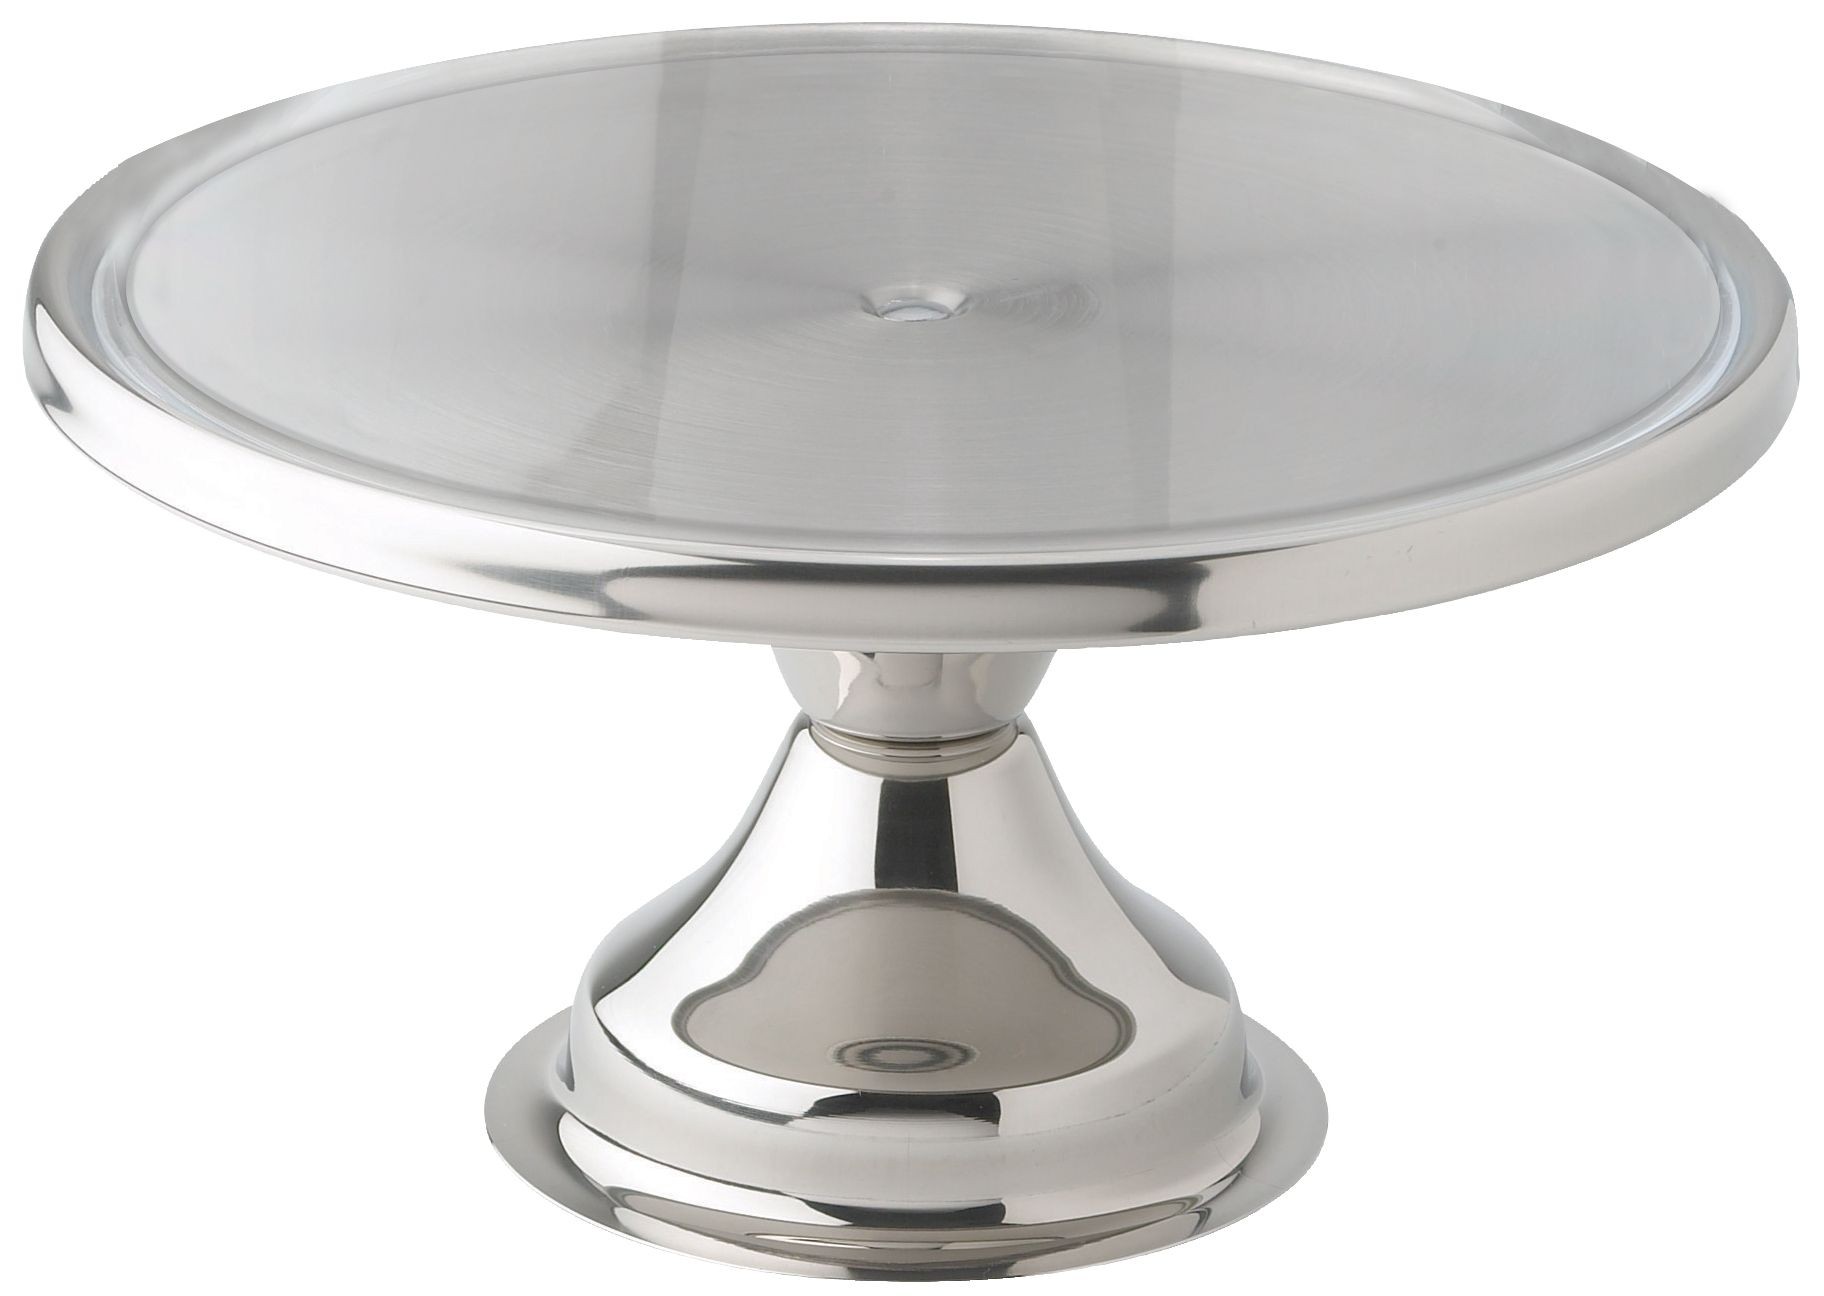 Winco CKS-13 Stainless Steel Round Cake Stand, 13"